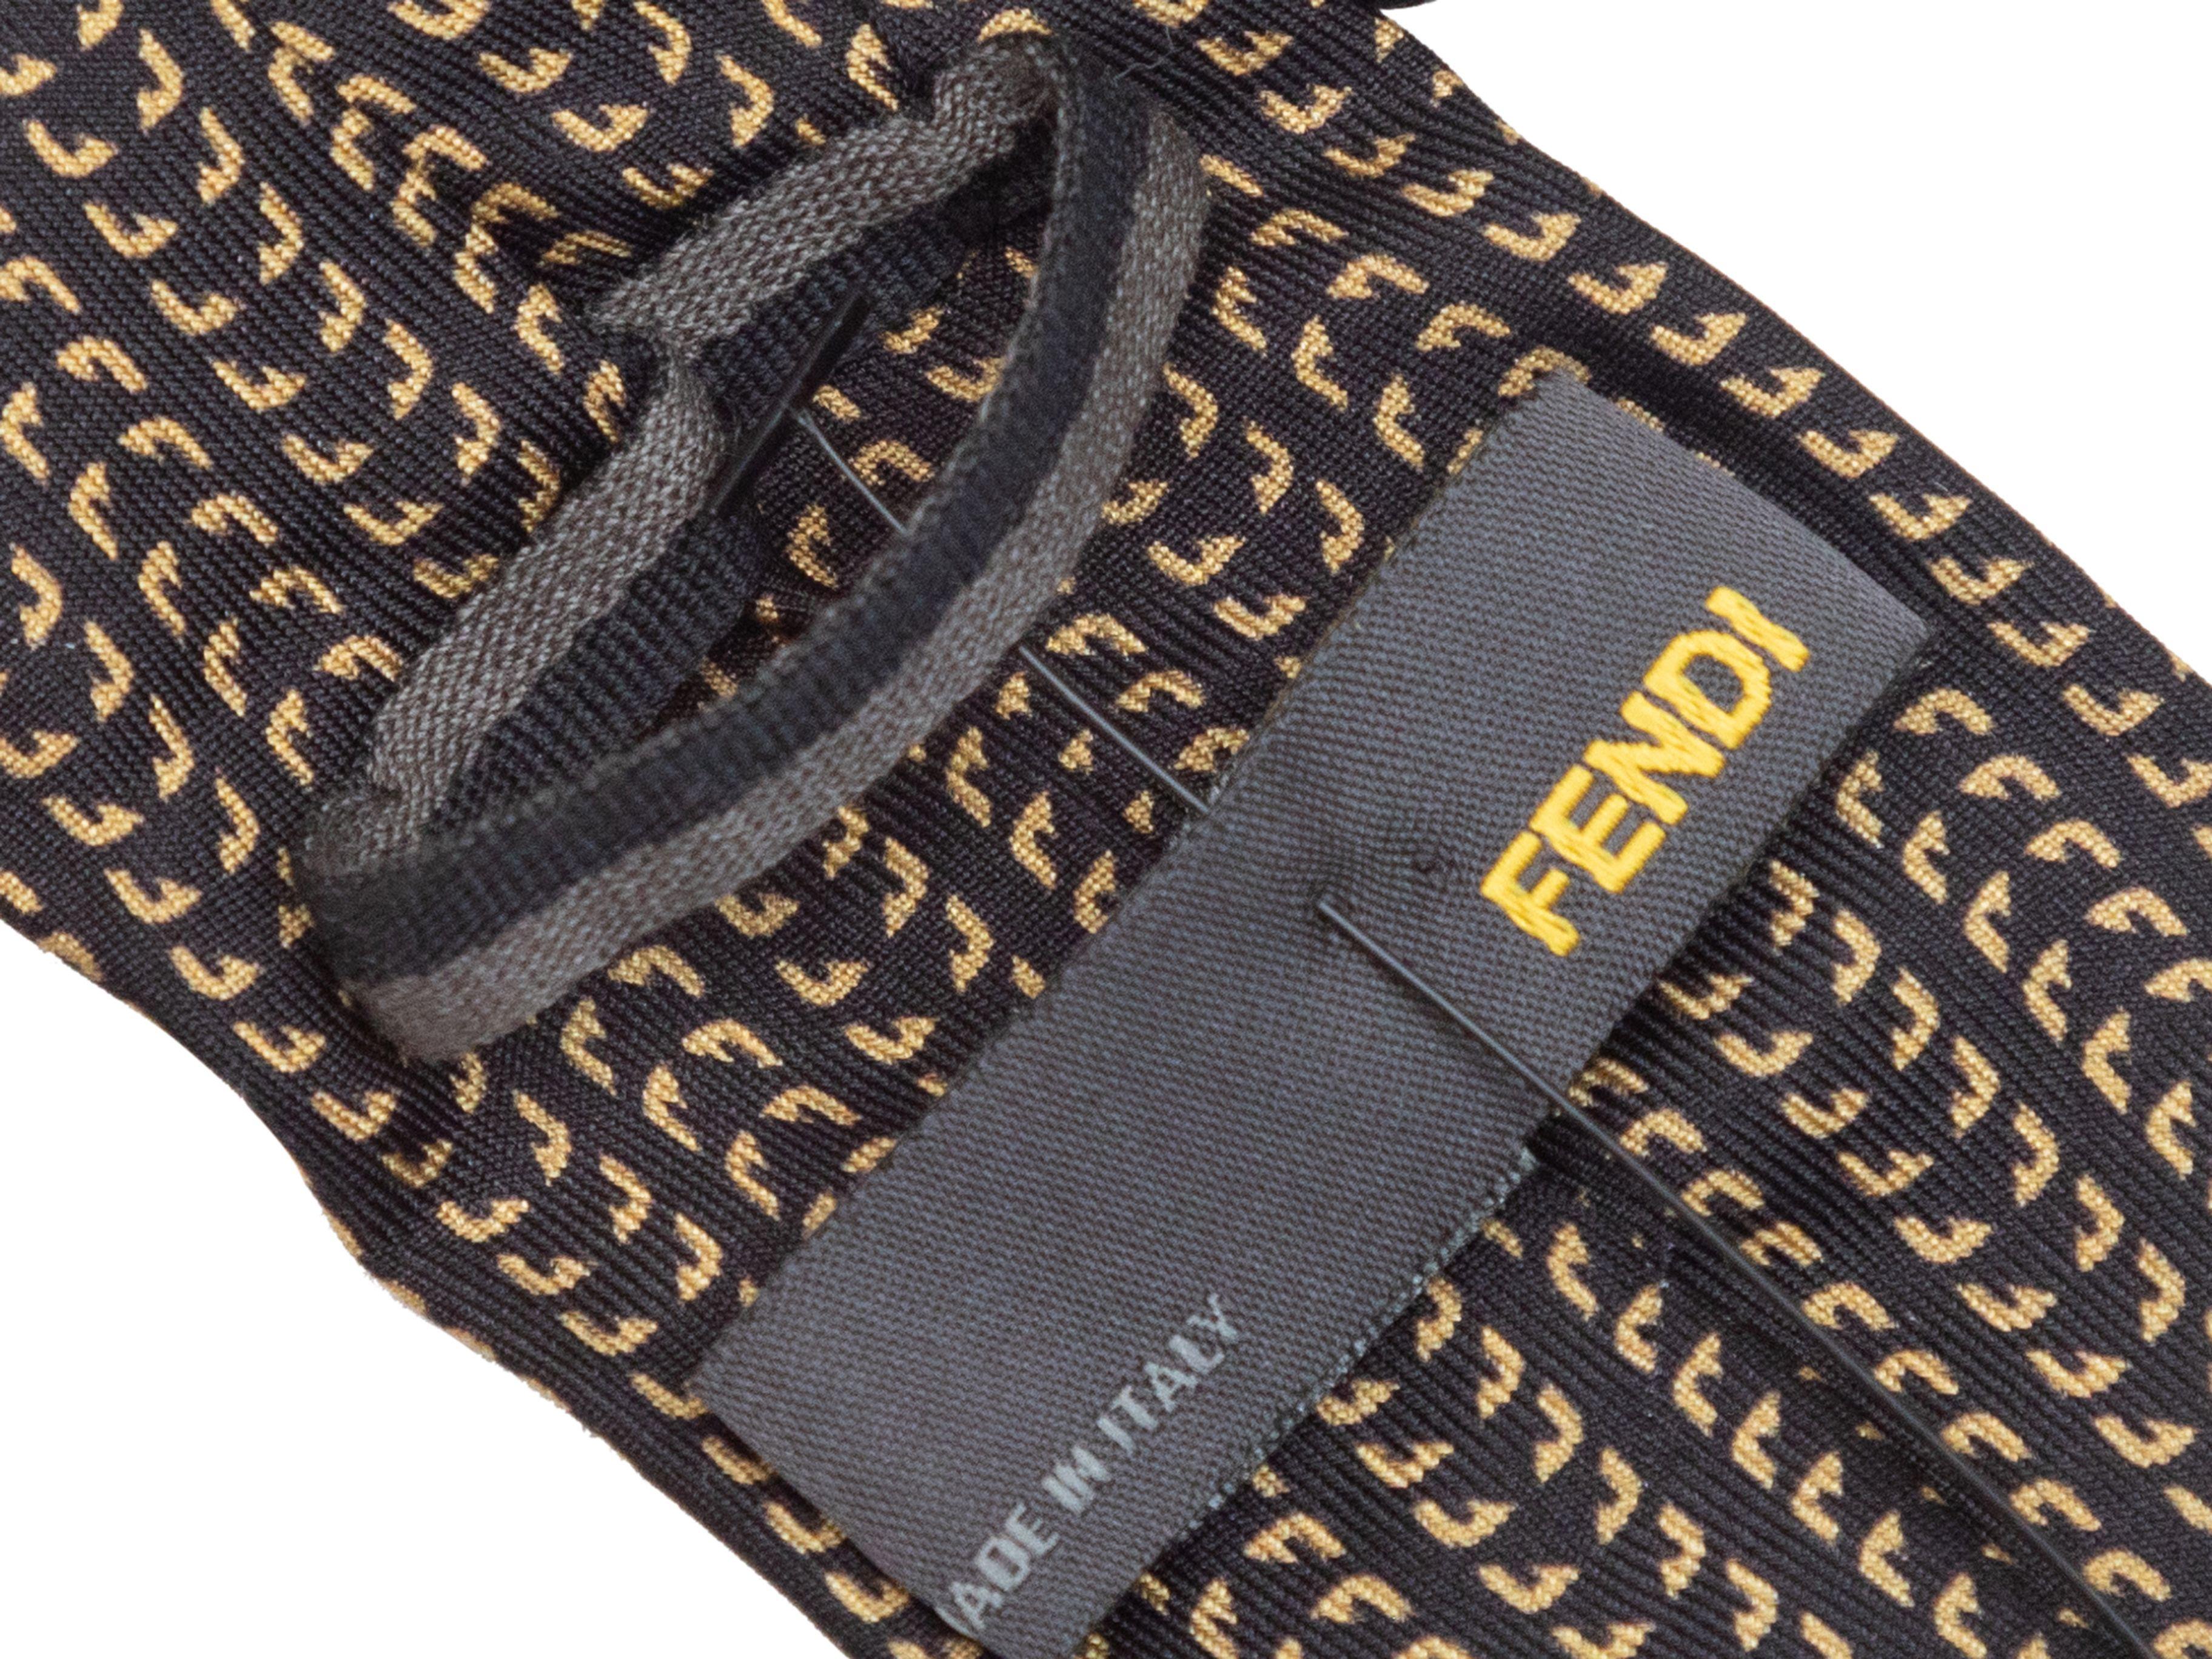 Product Details: Black and gold monster eye print silk necktie by Fendi. 2.35